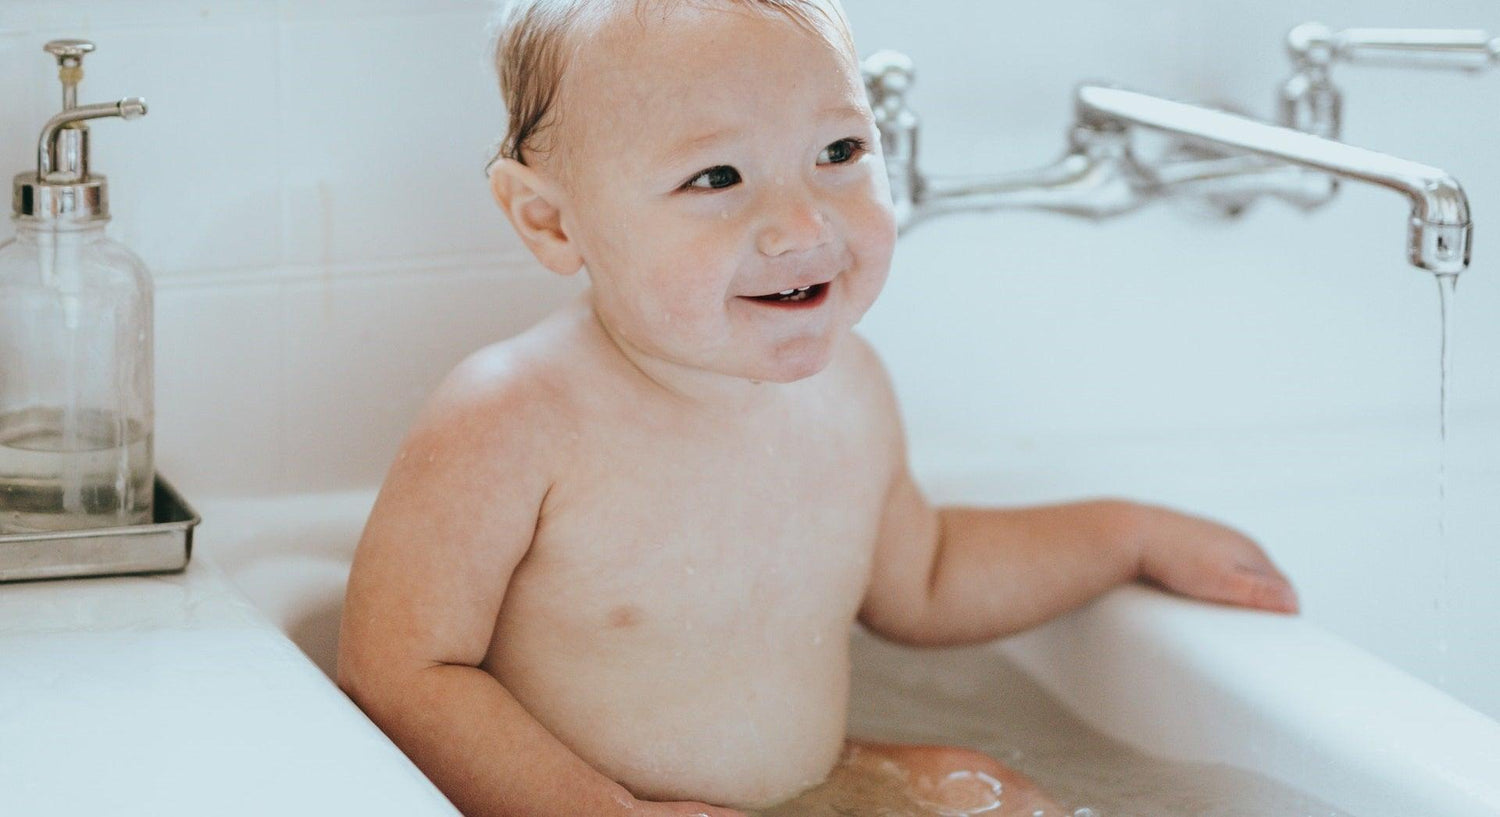 What To Look For Before Buying a Newborn Baby Bathtub?